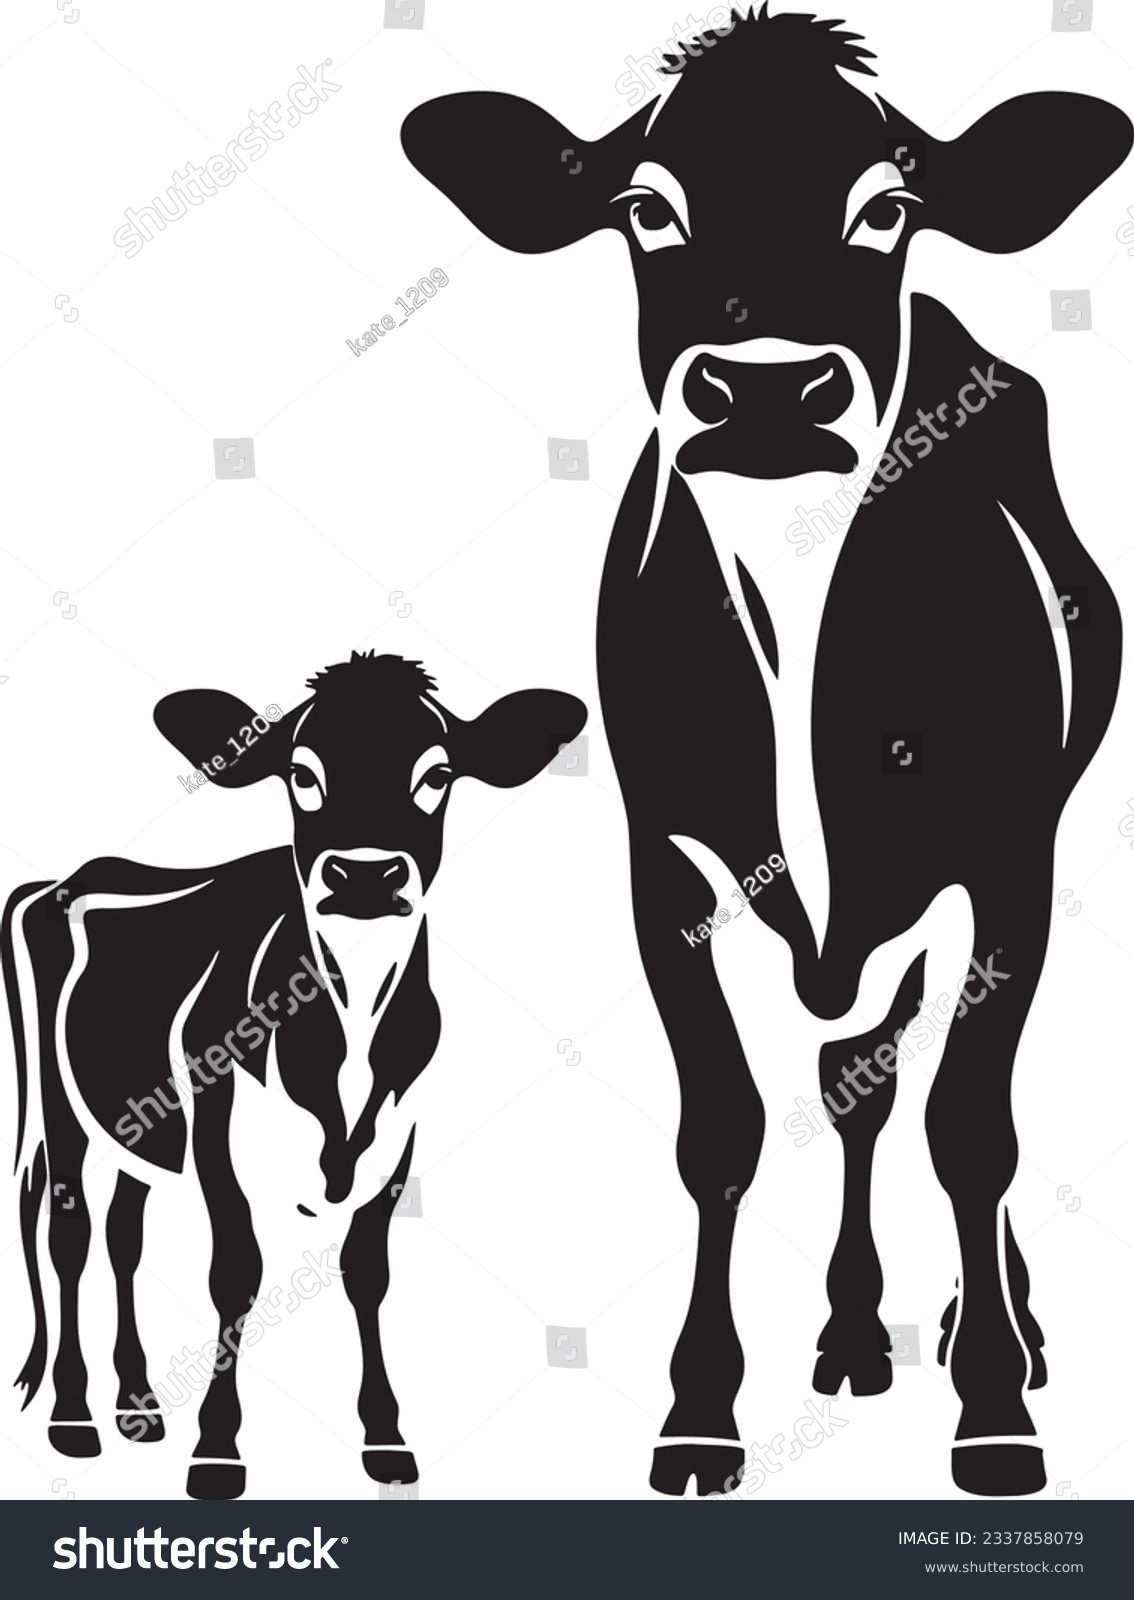 SVG of Cow with calf, Basic simple Minimalist vector graphic, isolated on white background, black and white svg